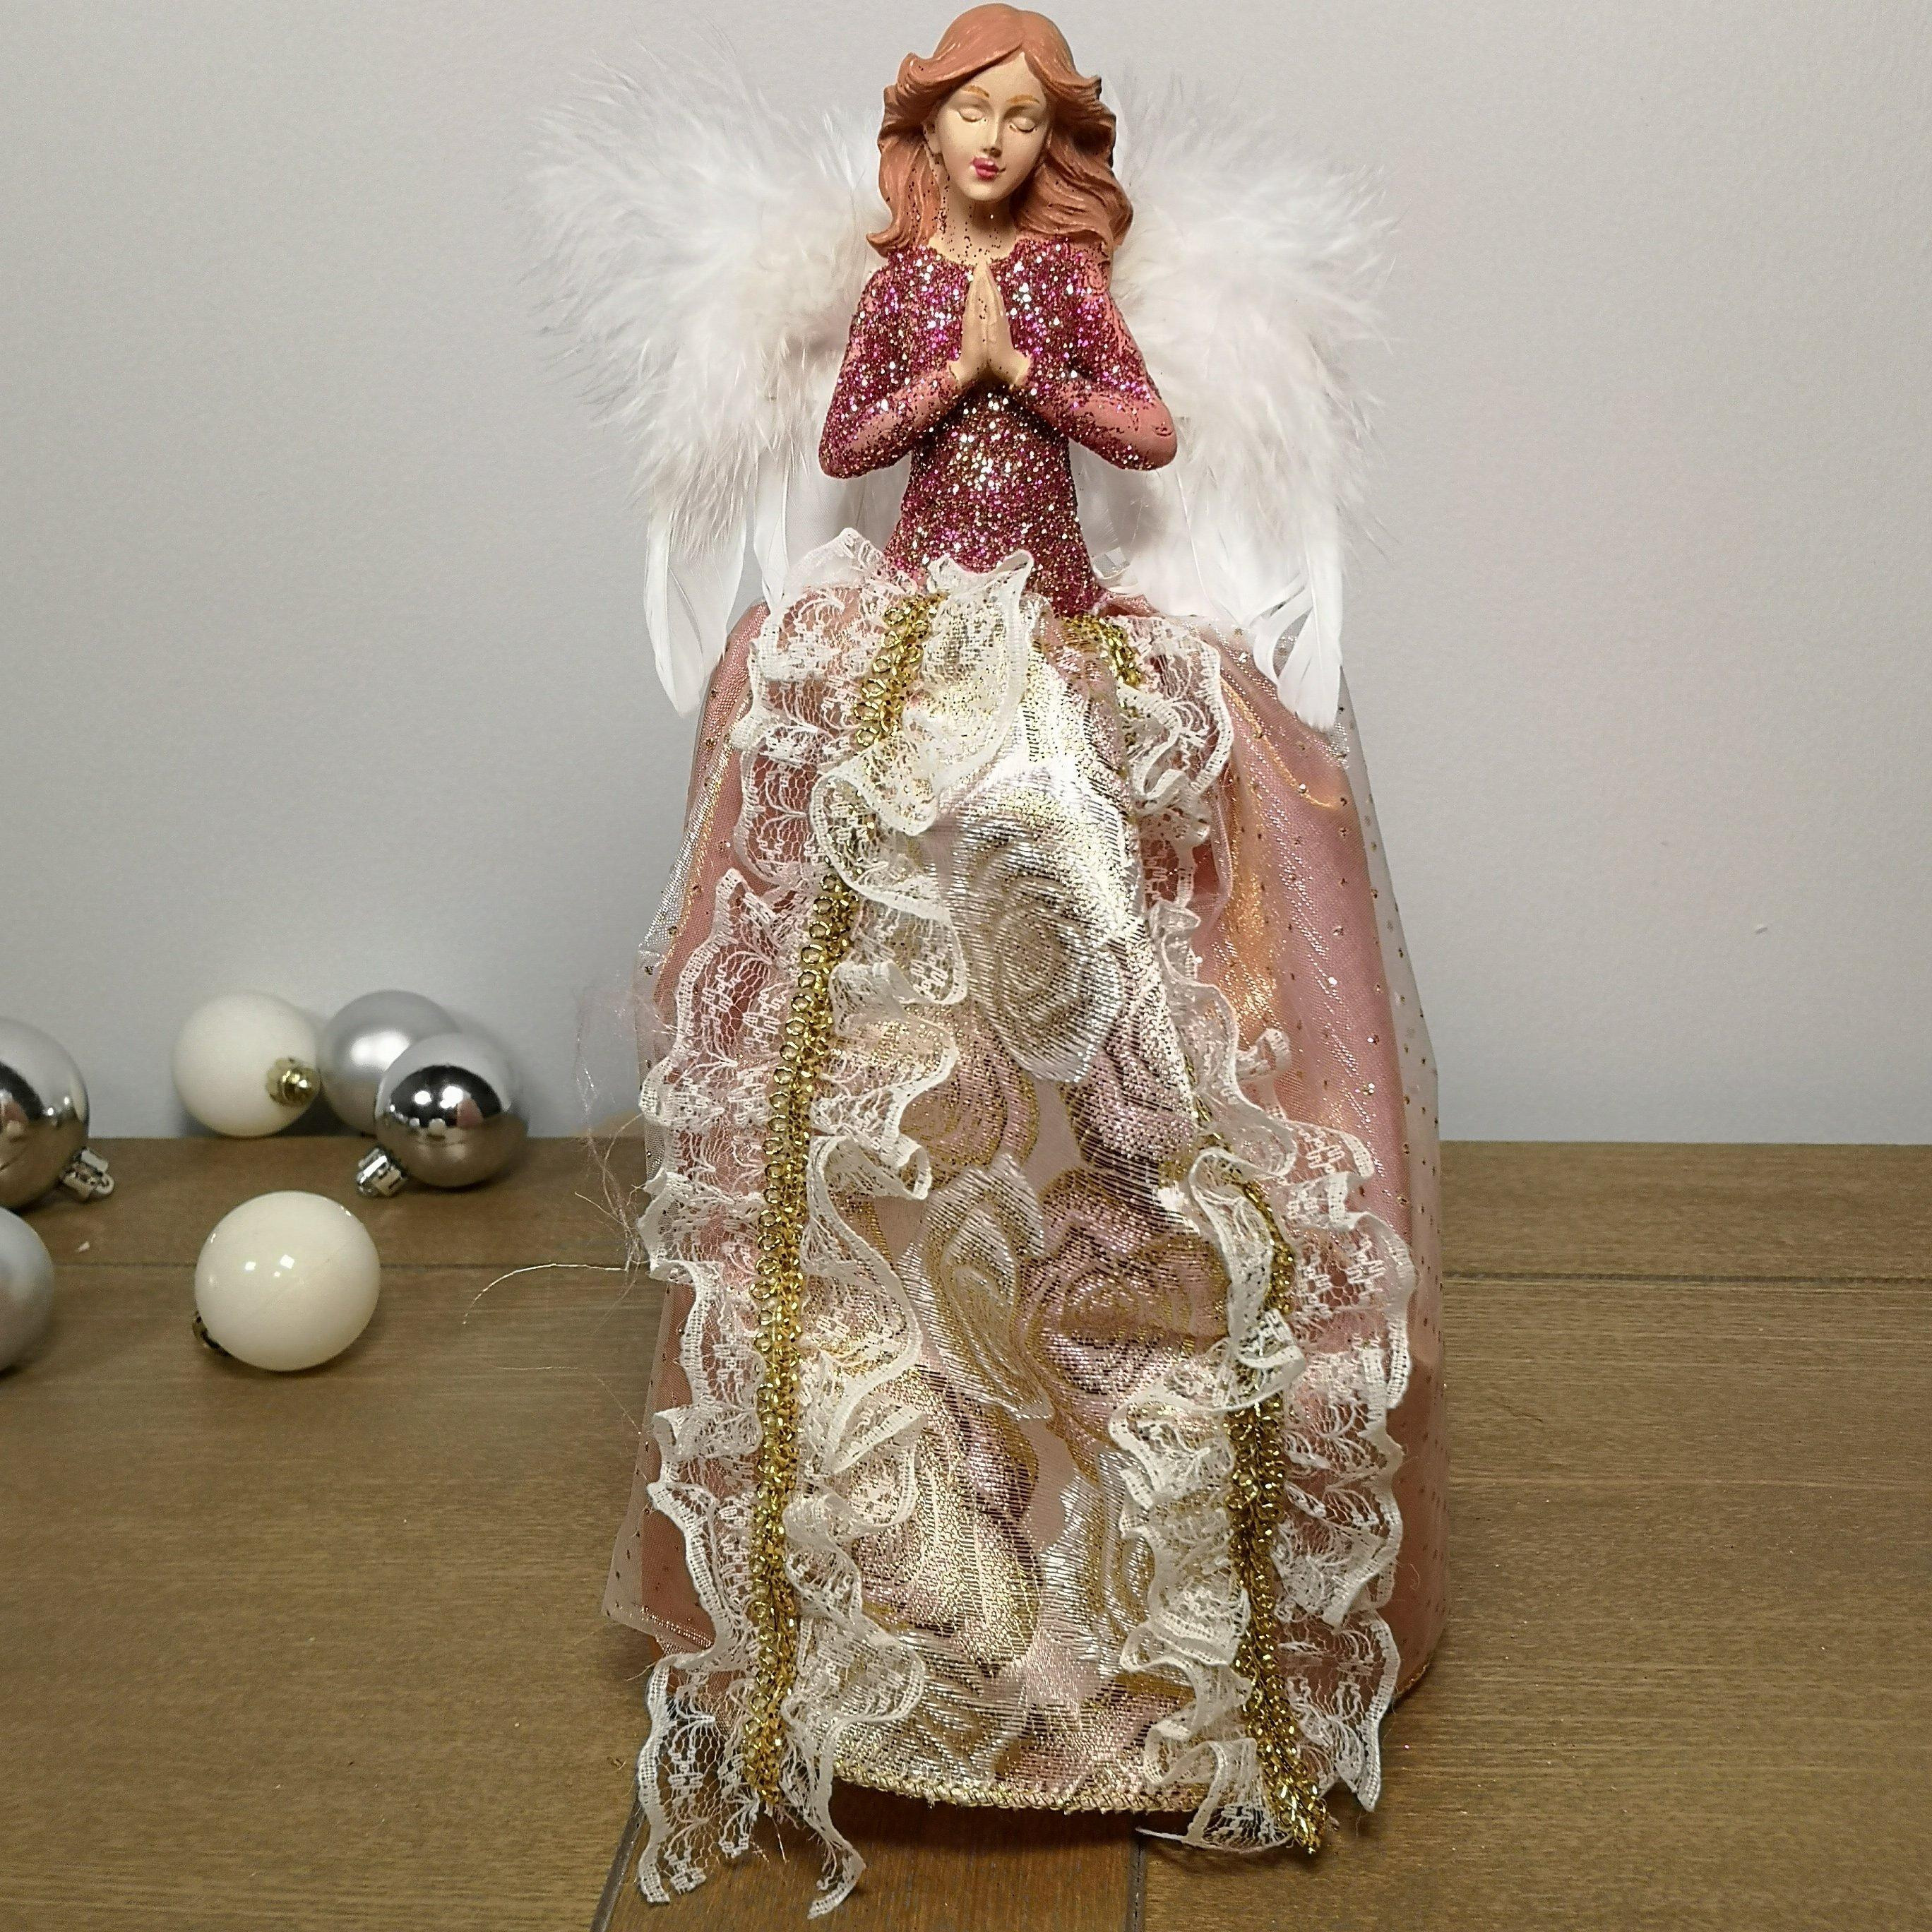 28cm Premier Christmas Tree Topper Angel Decoration with Feather Wings in Pink & Gold - image 1